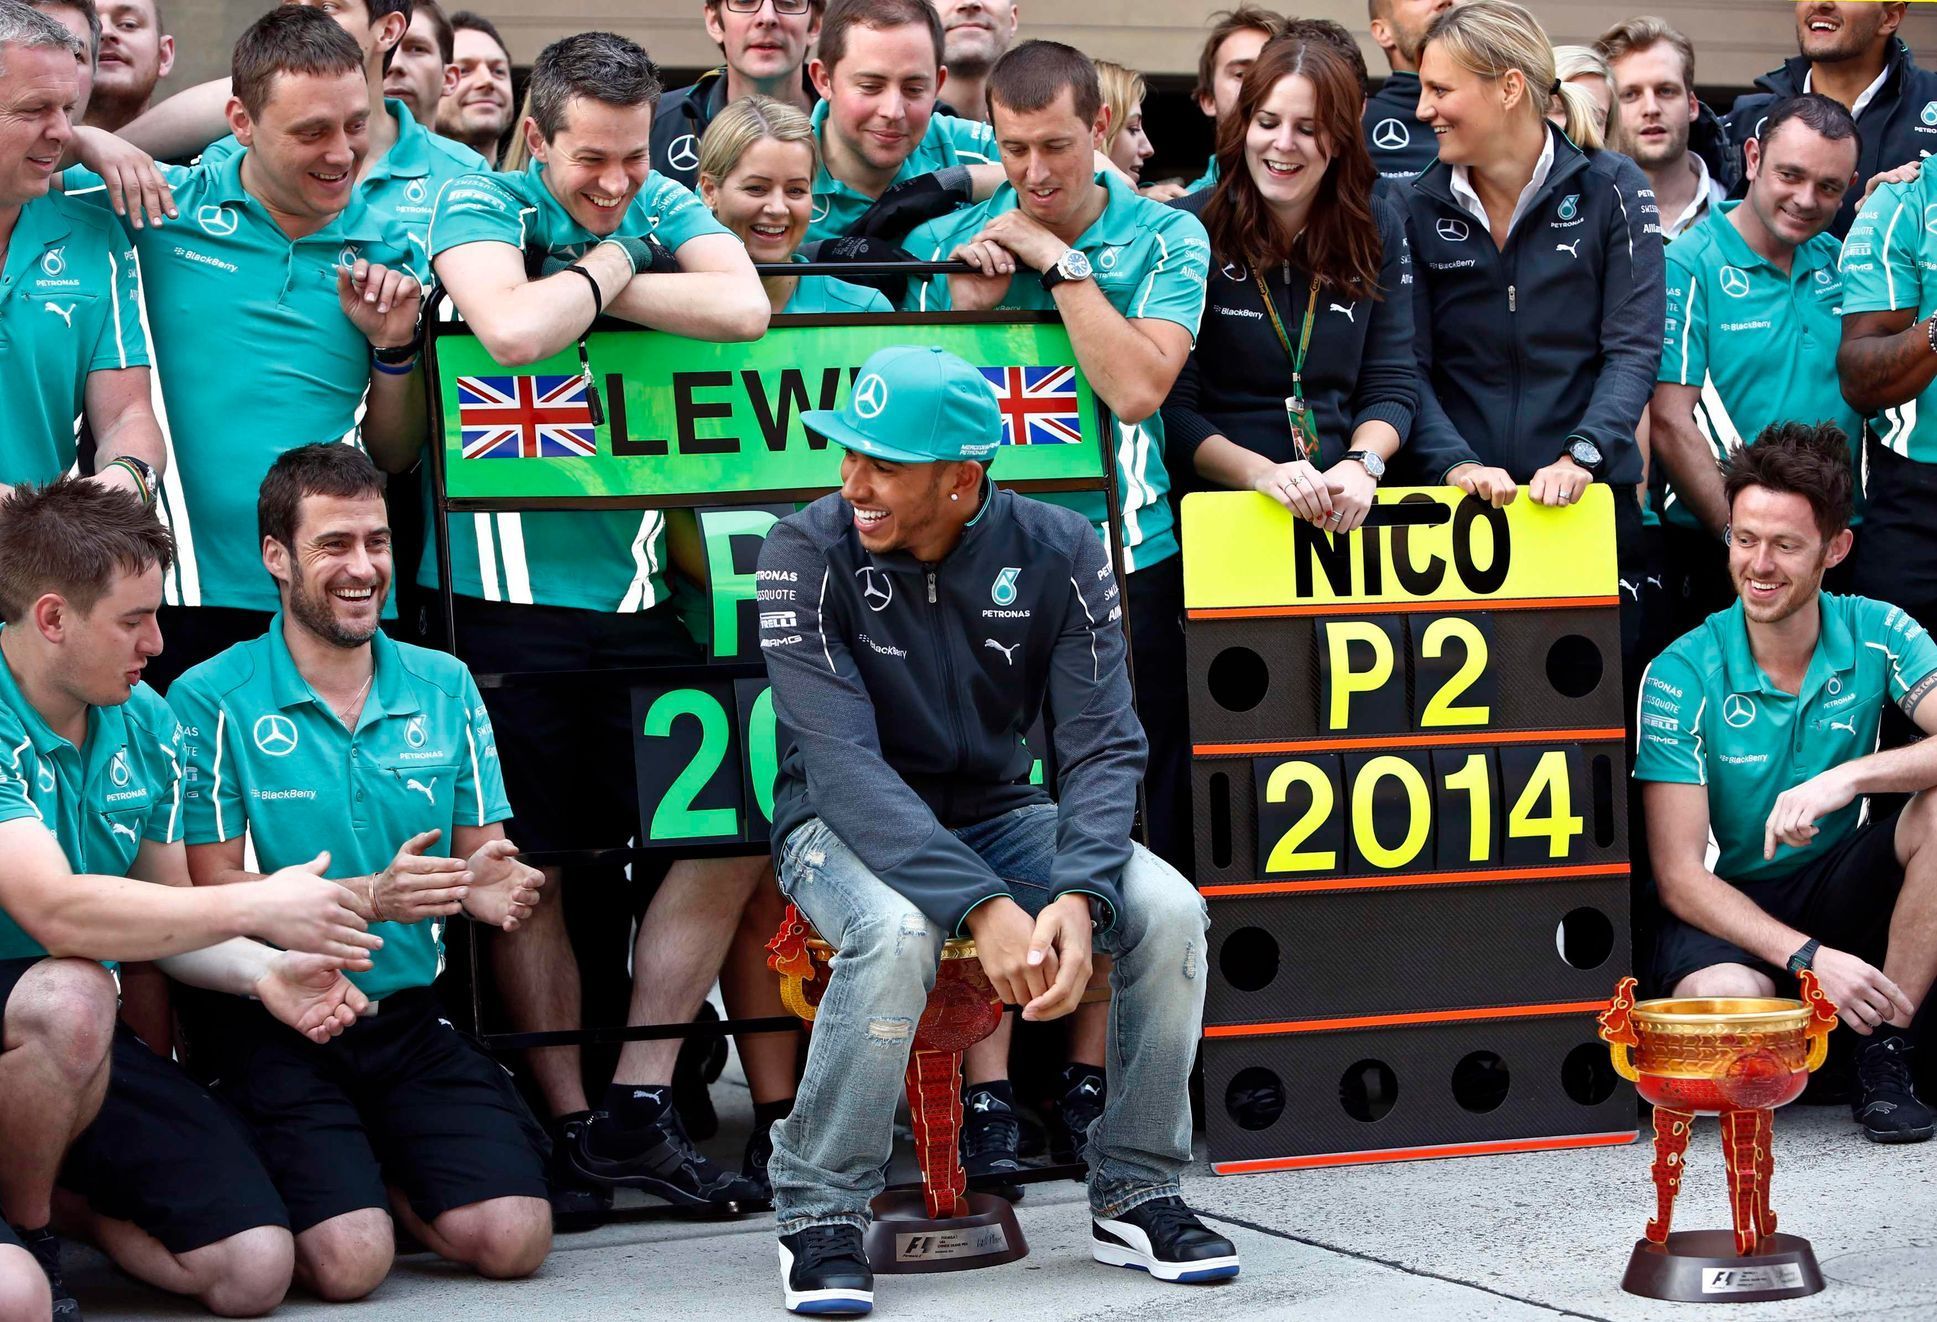 Mercedes Formula One driver Lewis Hamilton of Britain sits on his trophy as he celebrates with his team members during a photo call after winning Chinese F1 Grand Prix at Shanghai International circui